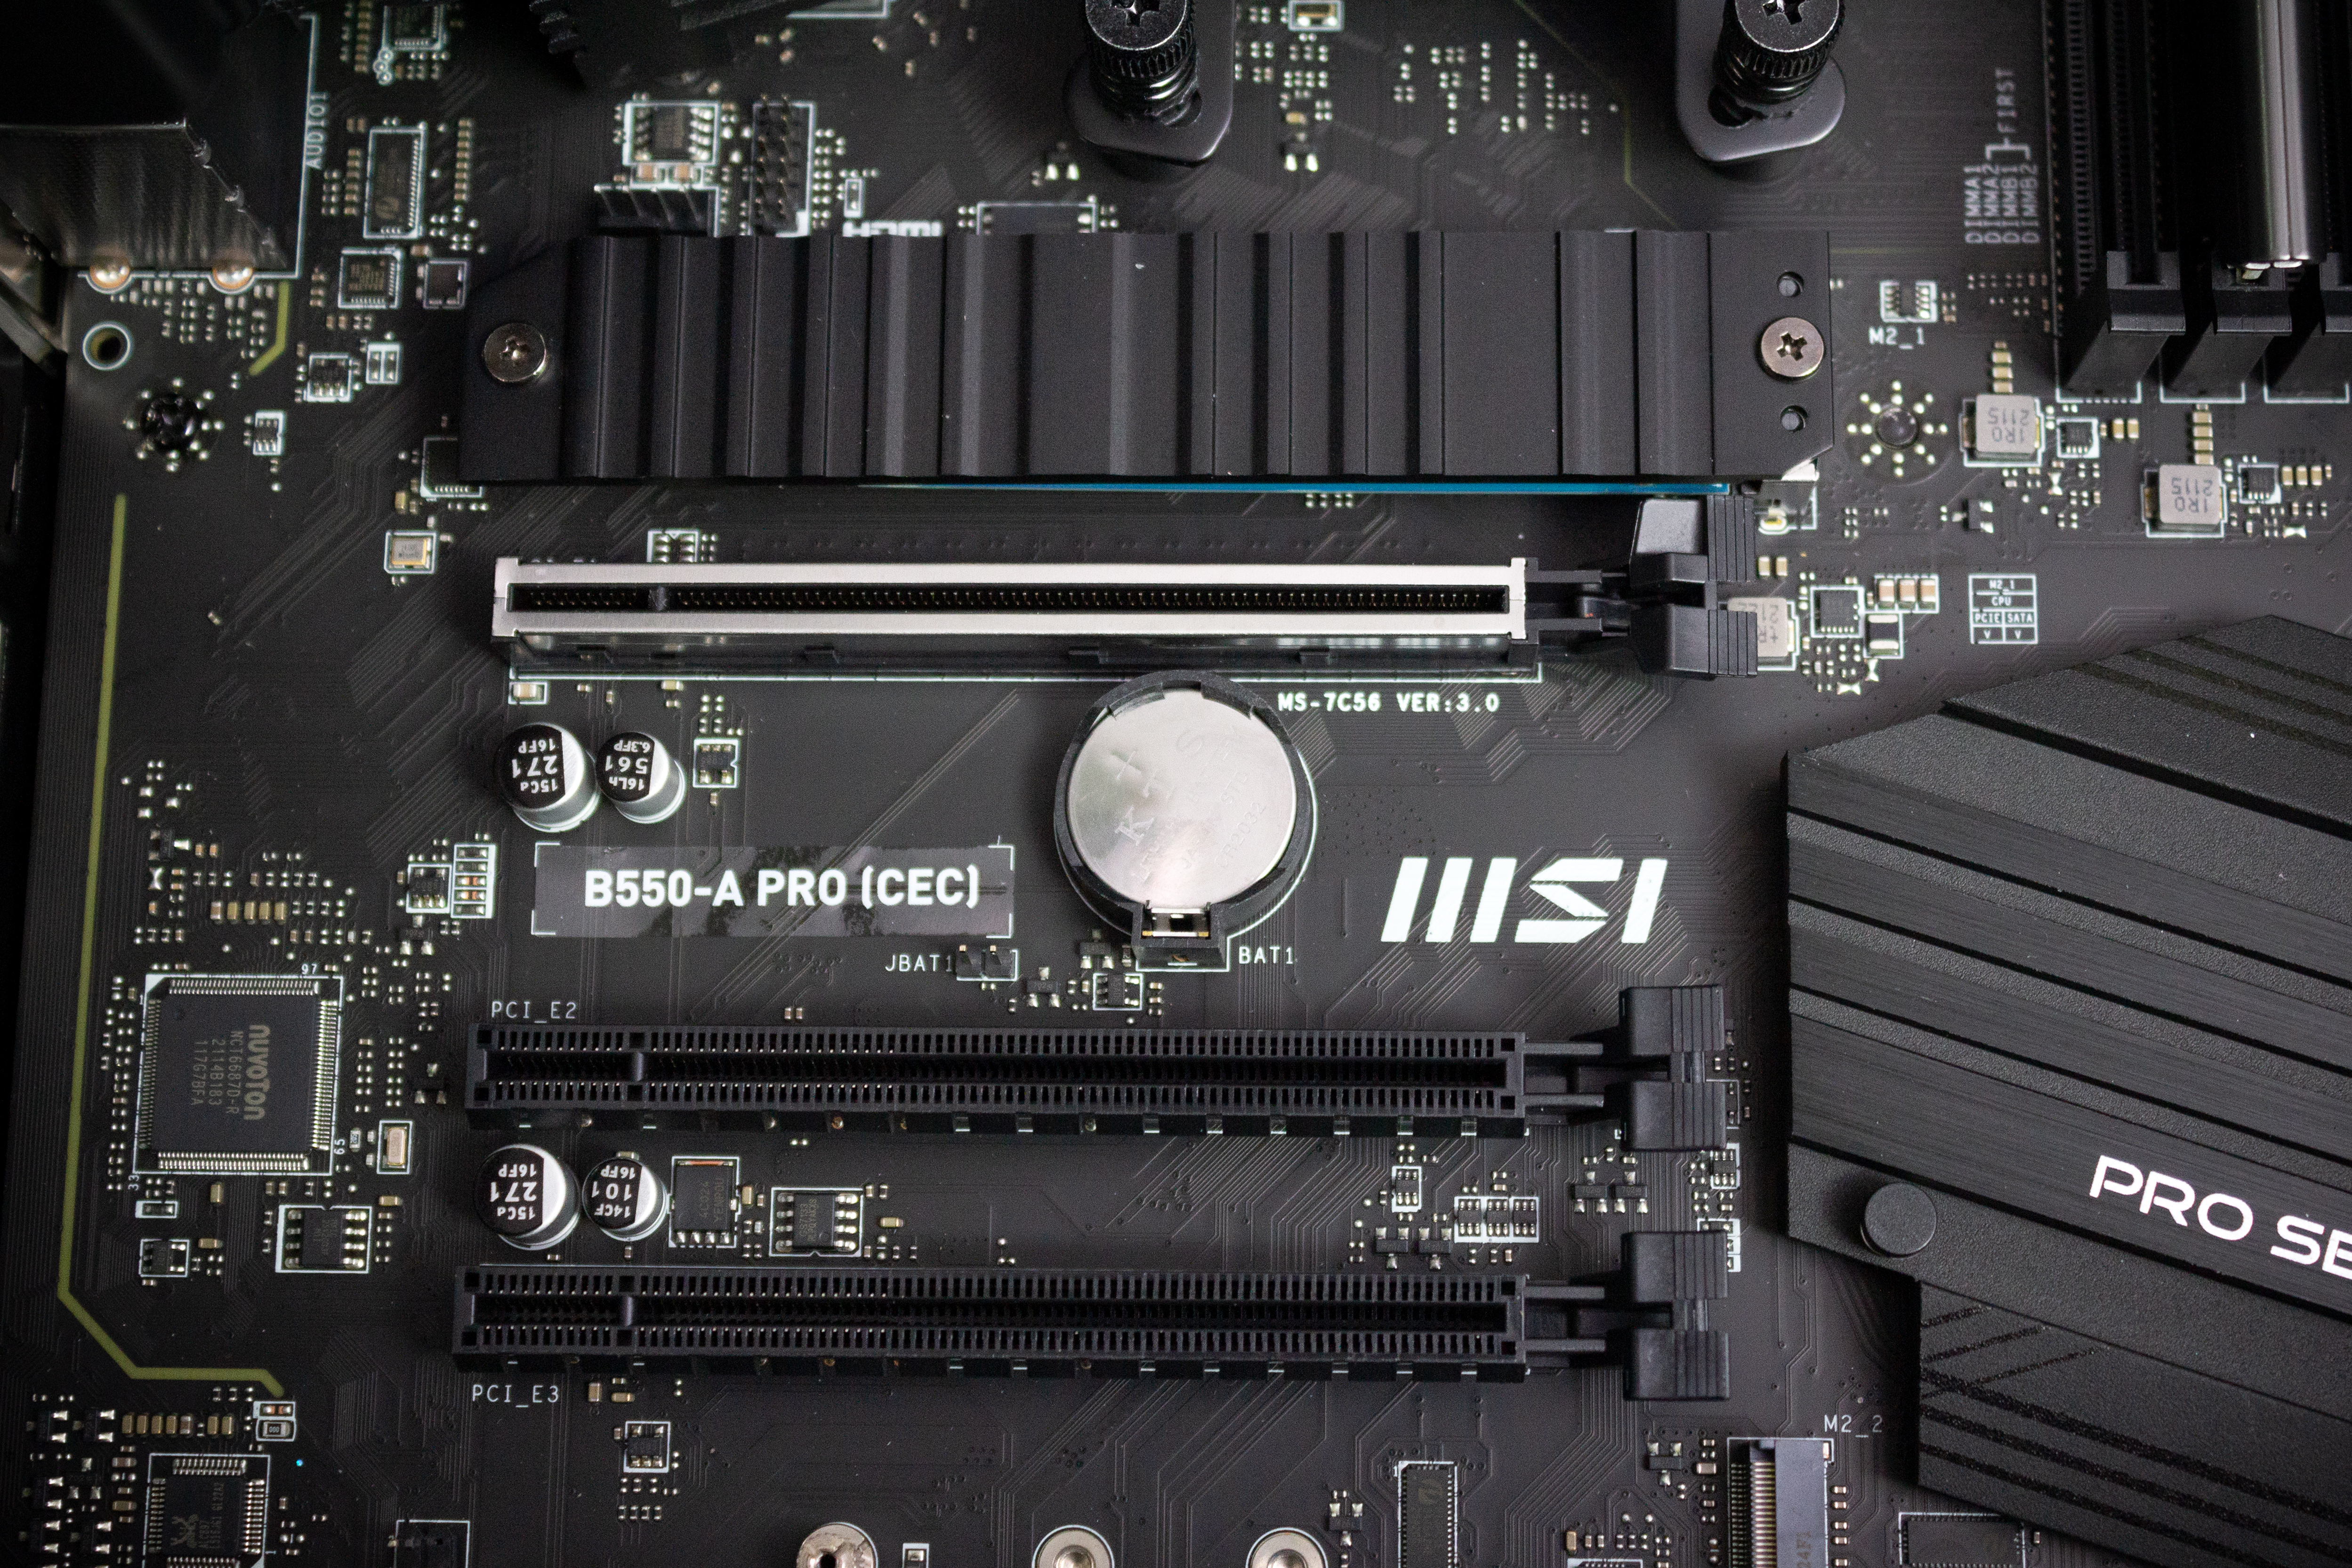 CMOS battery on an MSI B550-A Pro (CEC) motherboard